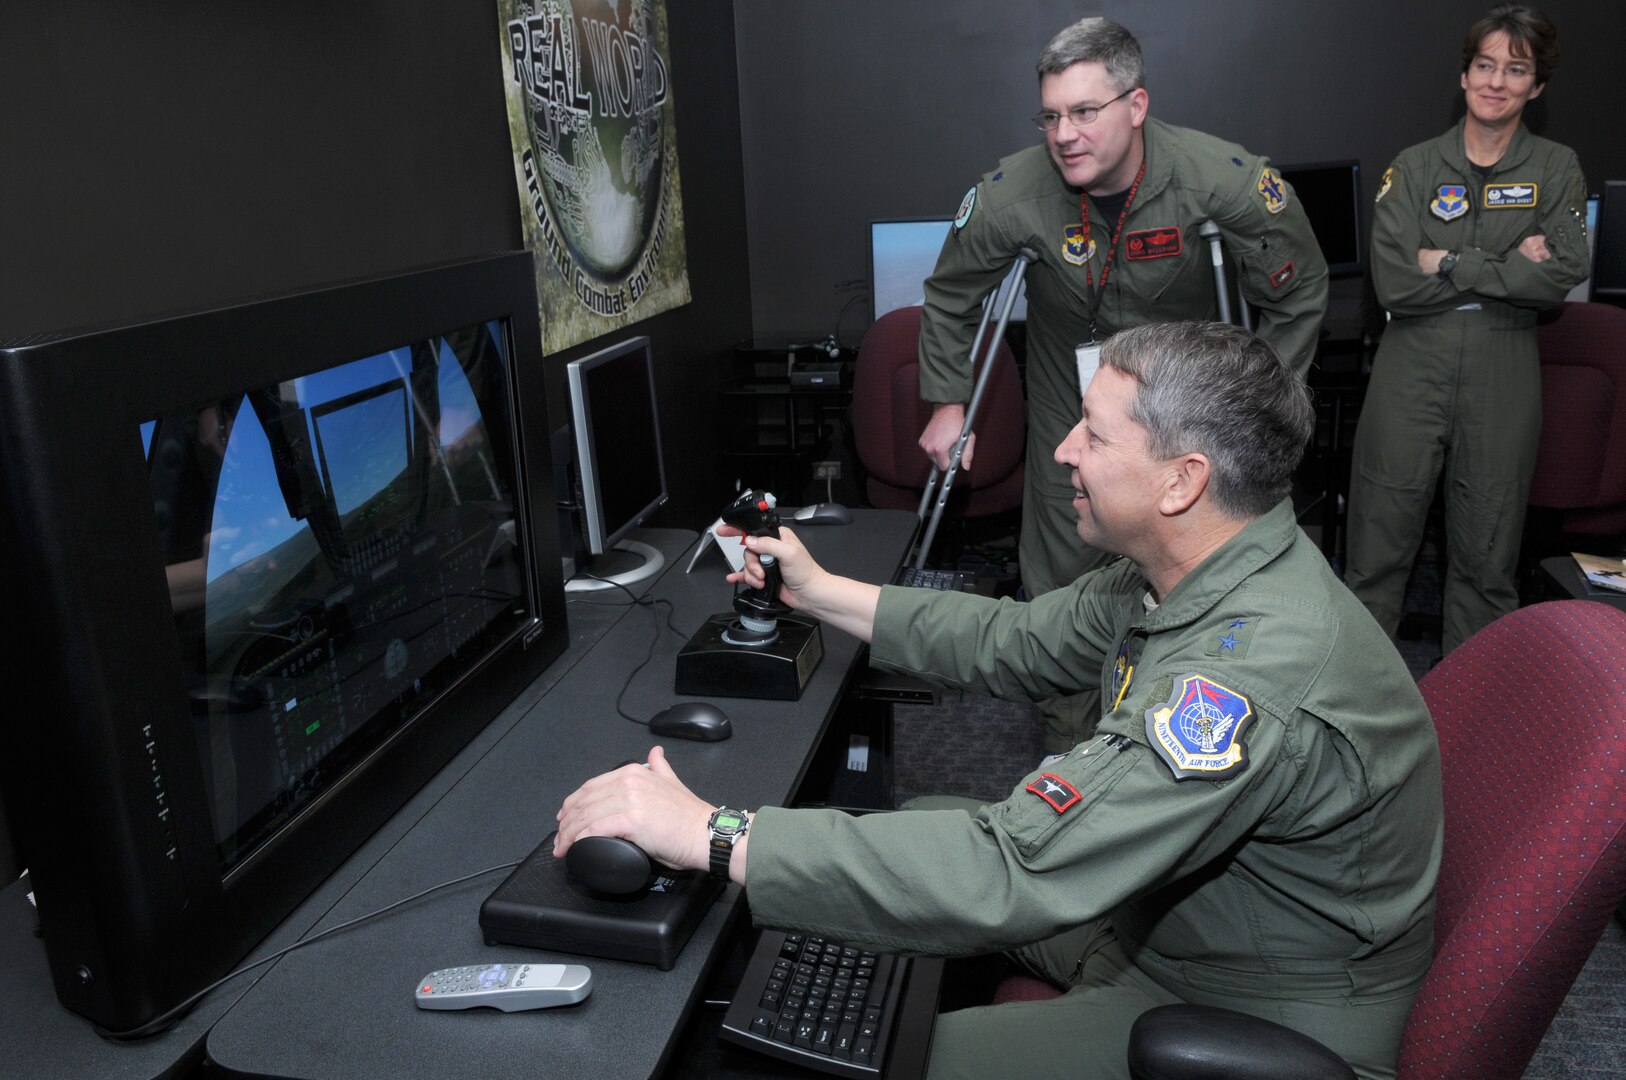 Maj. Gen. Gregory Feest, 19th Air Force commander, maneuvers himself through a simulation as Lt. Col. Chris Welborn, 563rd Flying Training Squadron commander, and Col. Jacqueline Van Ovost, 12th Flying Training Wing commander, look on. General Feest visited several areas of the 12th Flying Training Wing Jan. 29-30 to learn more about the wing and its Airmen. (U.S. Air Force photo by Joel Martinez)